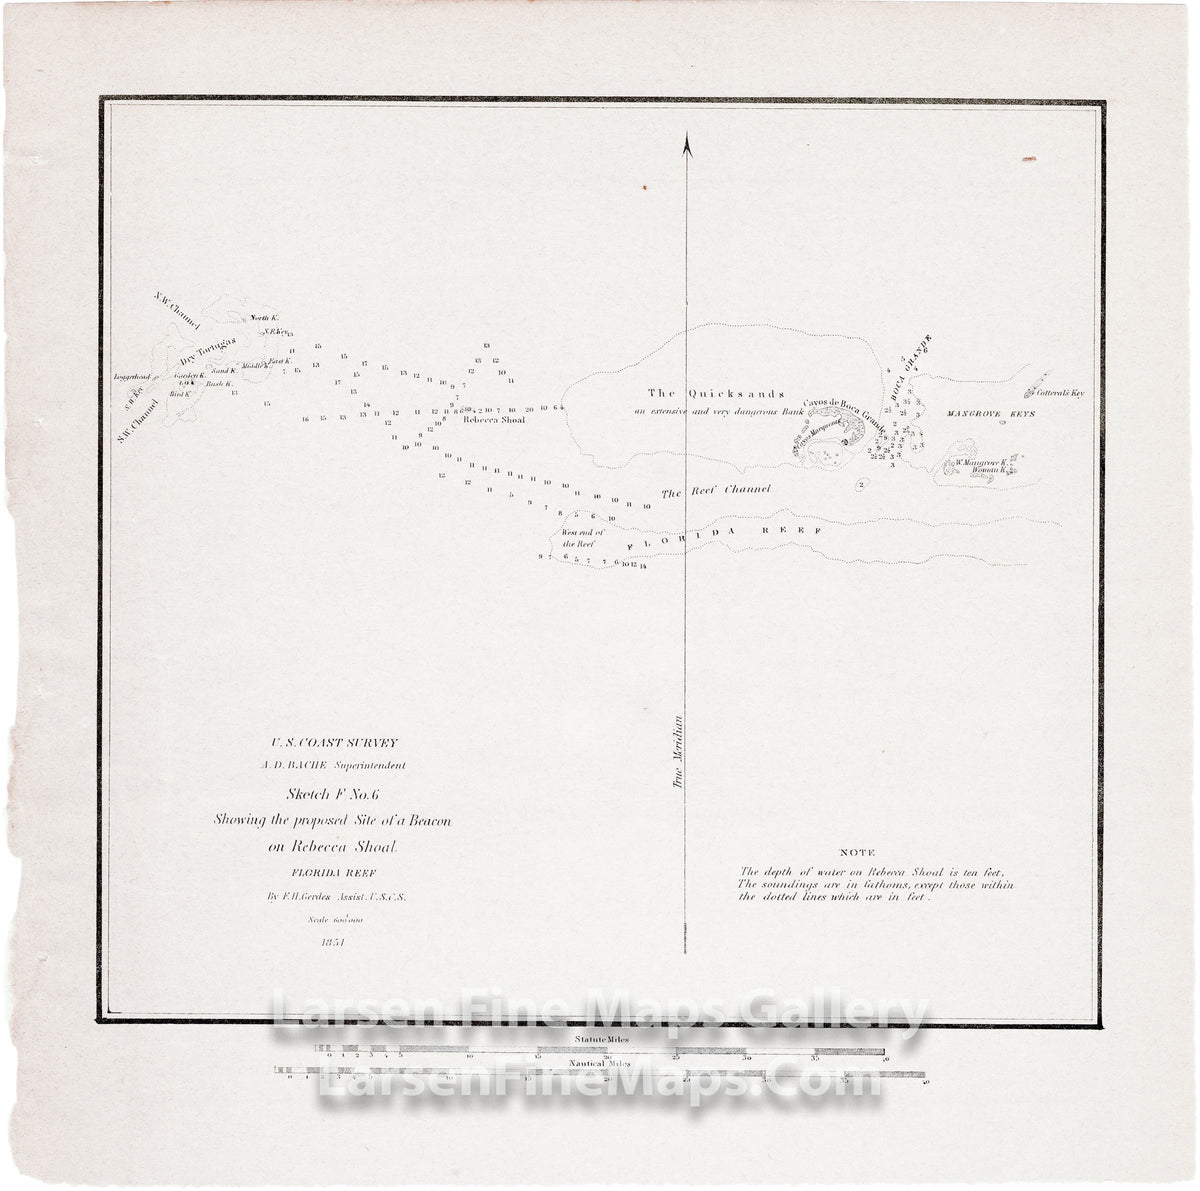 Sketch F No. 6 Showing the Proposed Site of a Beacon on Rebecca Shoal Florida Reef